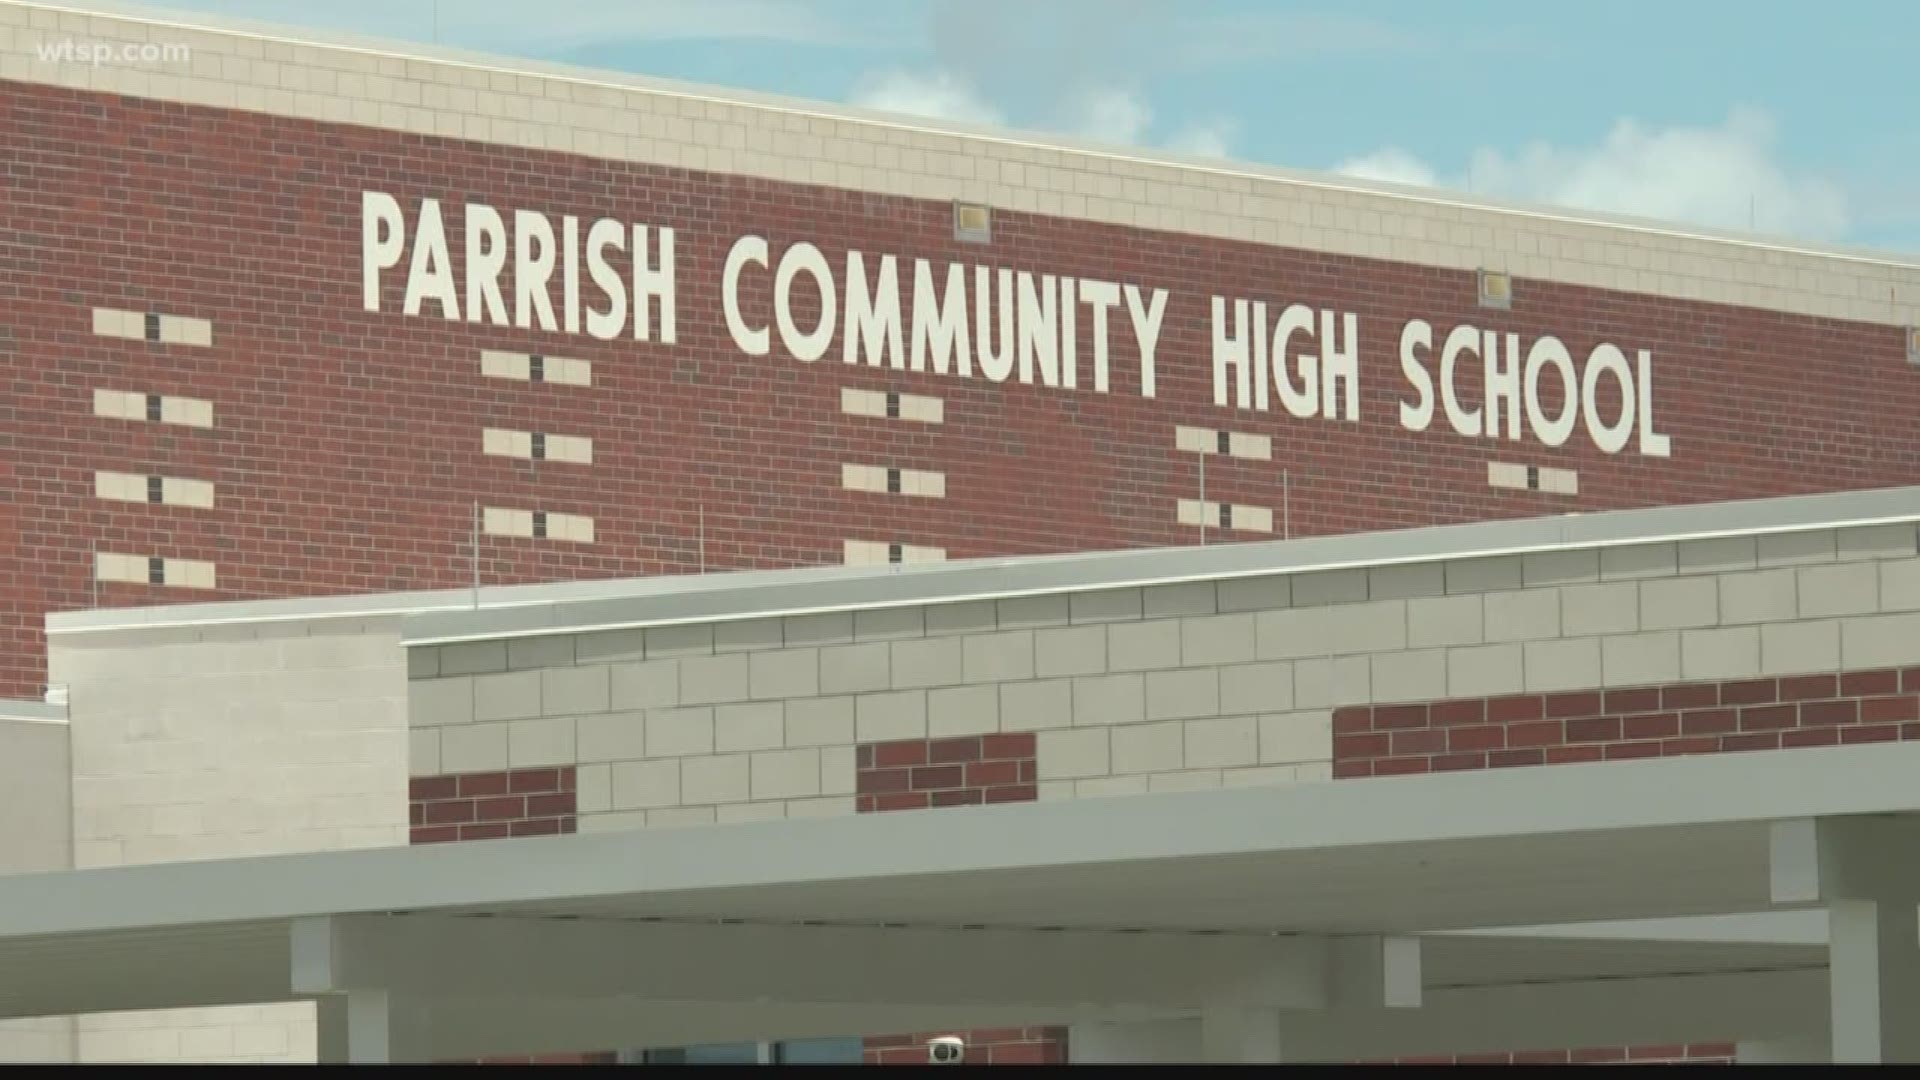 Parrish Community High School will open its doors in Manatee County this fall. The $93 million facility will be the home to 9th and 10th-grade students first and then will add juniors and seniors over the next two years.